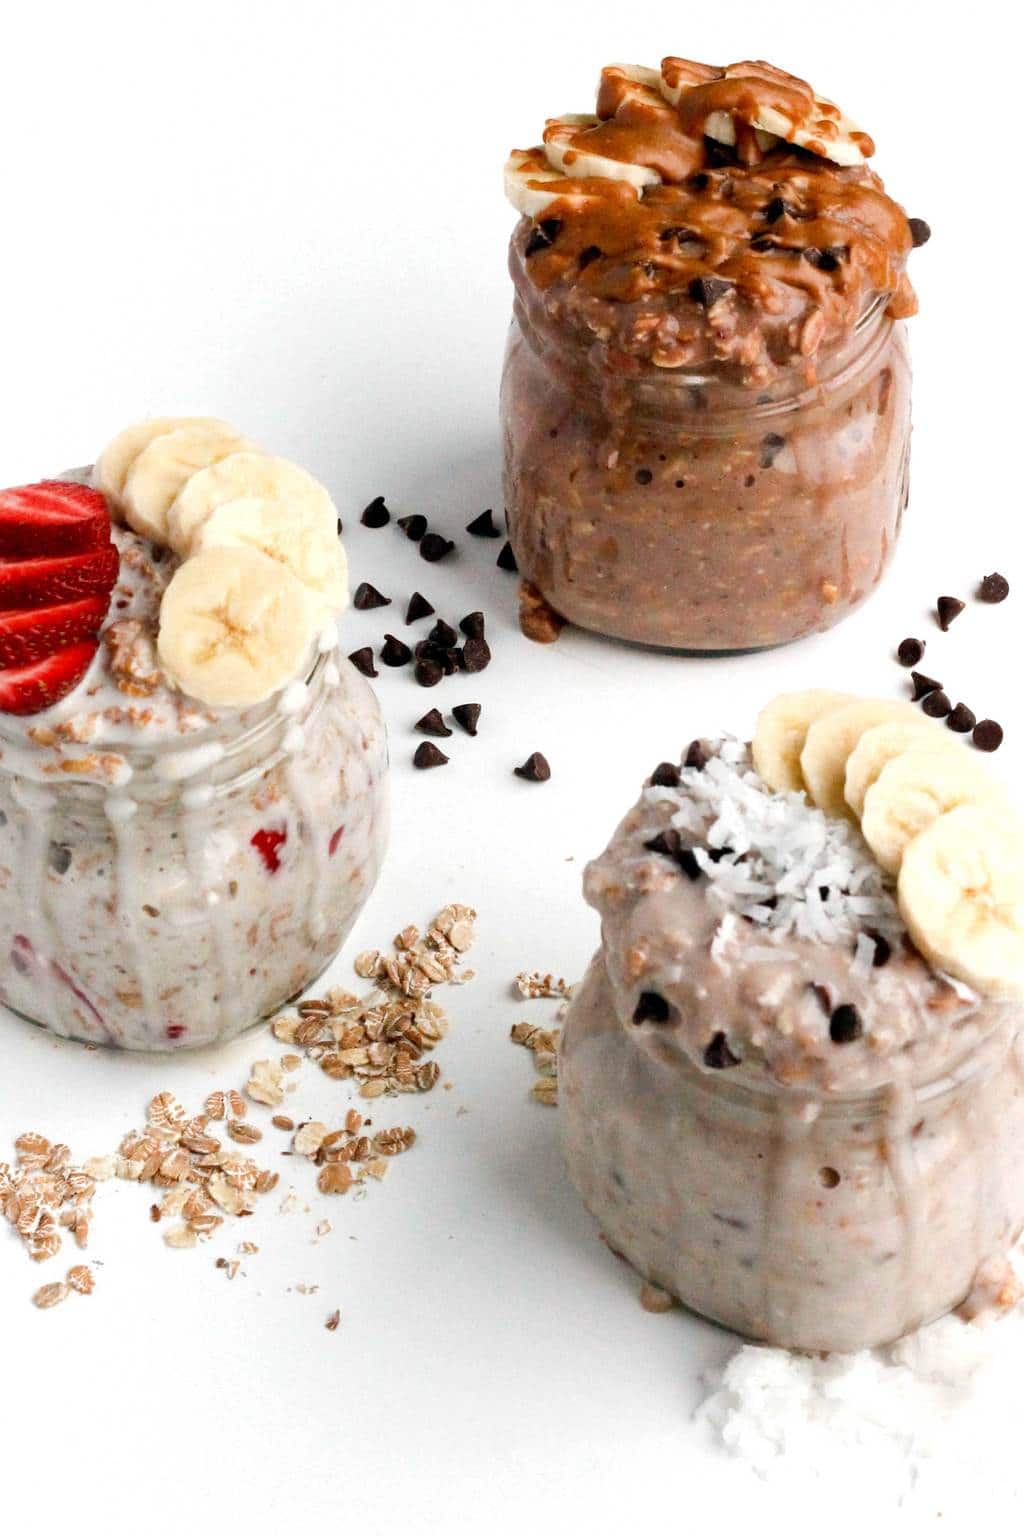 Overnight Oats in a Jar: 3 Quick and Healthy Recipes - Smile Sandwich